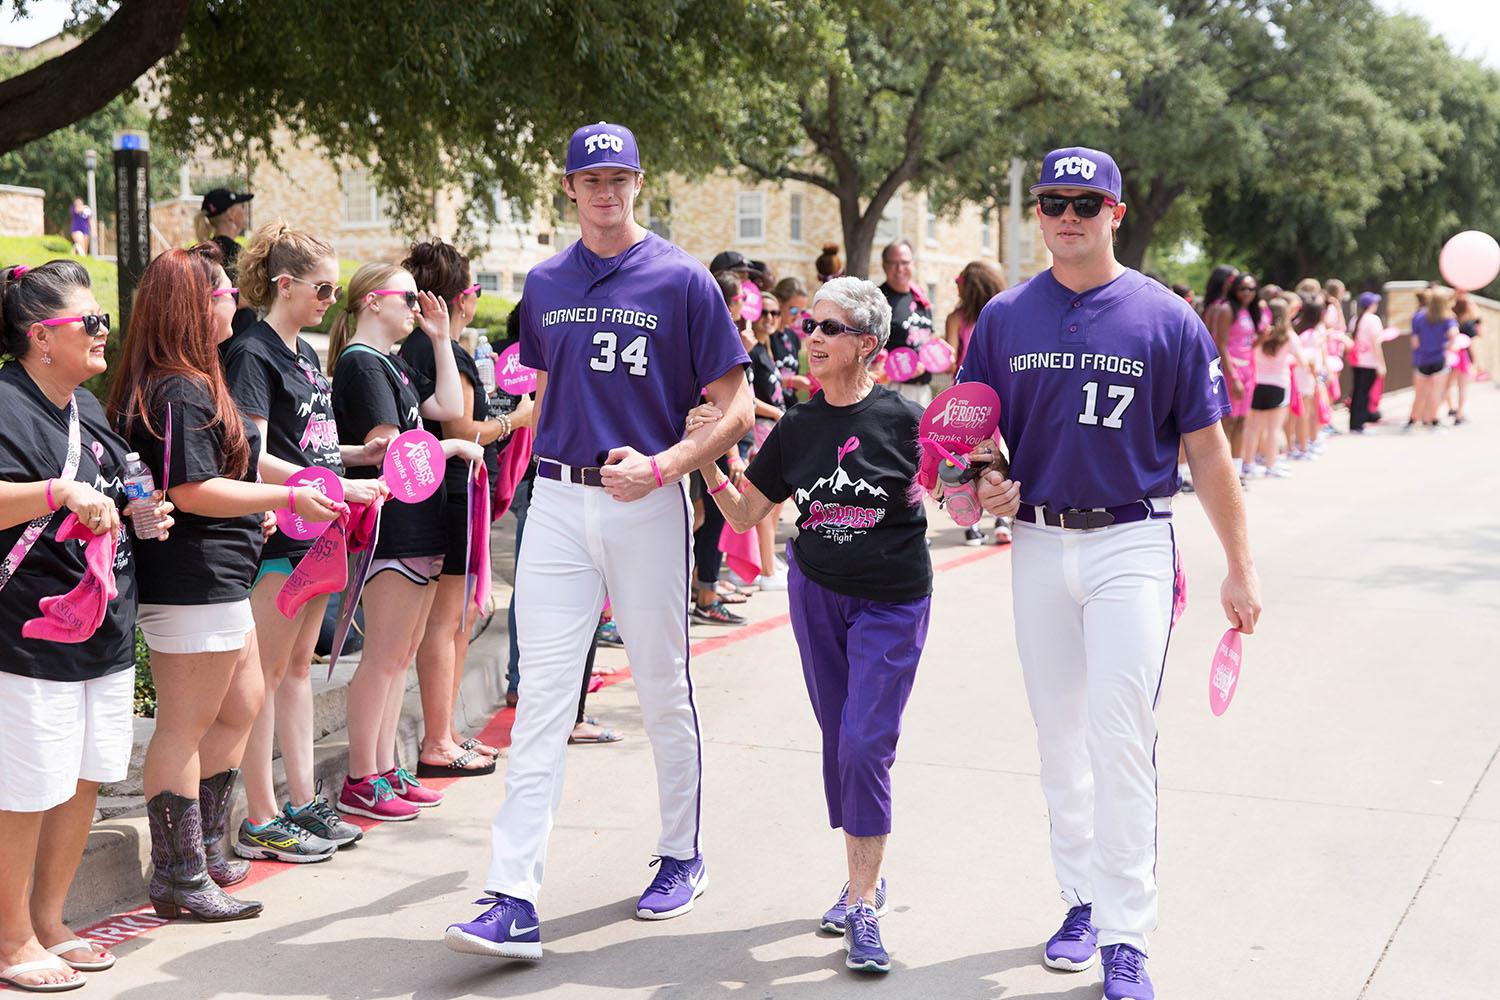 A+Frogs+for+the+Cure+halftime+celebration+extends+across+the+country+to+raise+awareness+about+breast+cancer.